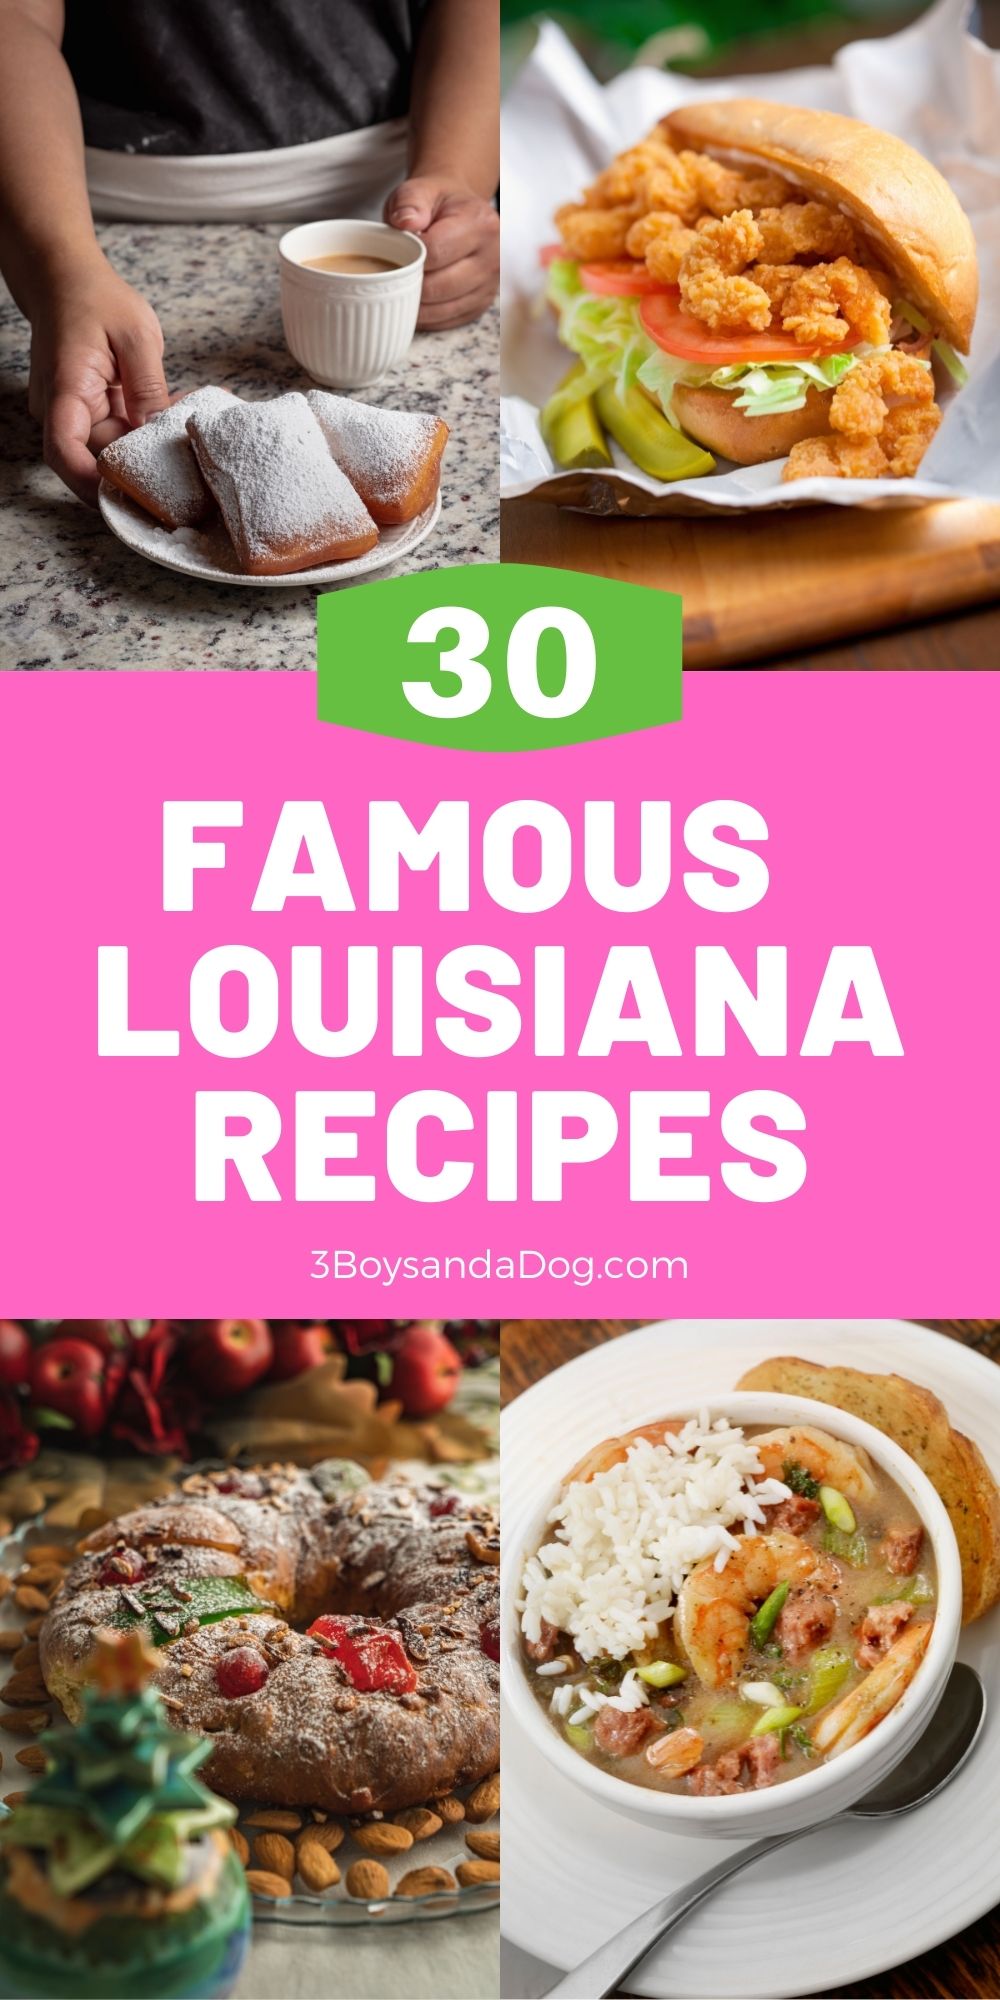 Pin of Famous Louisiana Recipes with four images